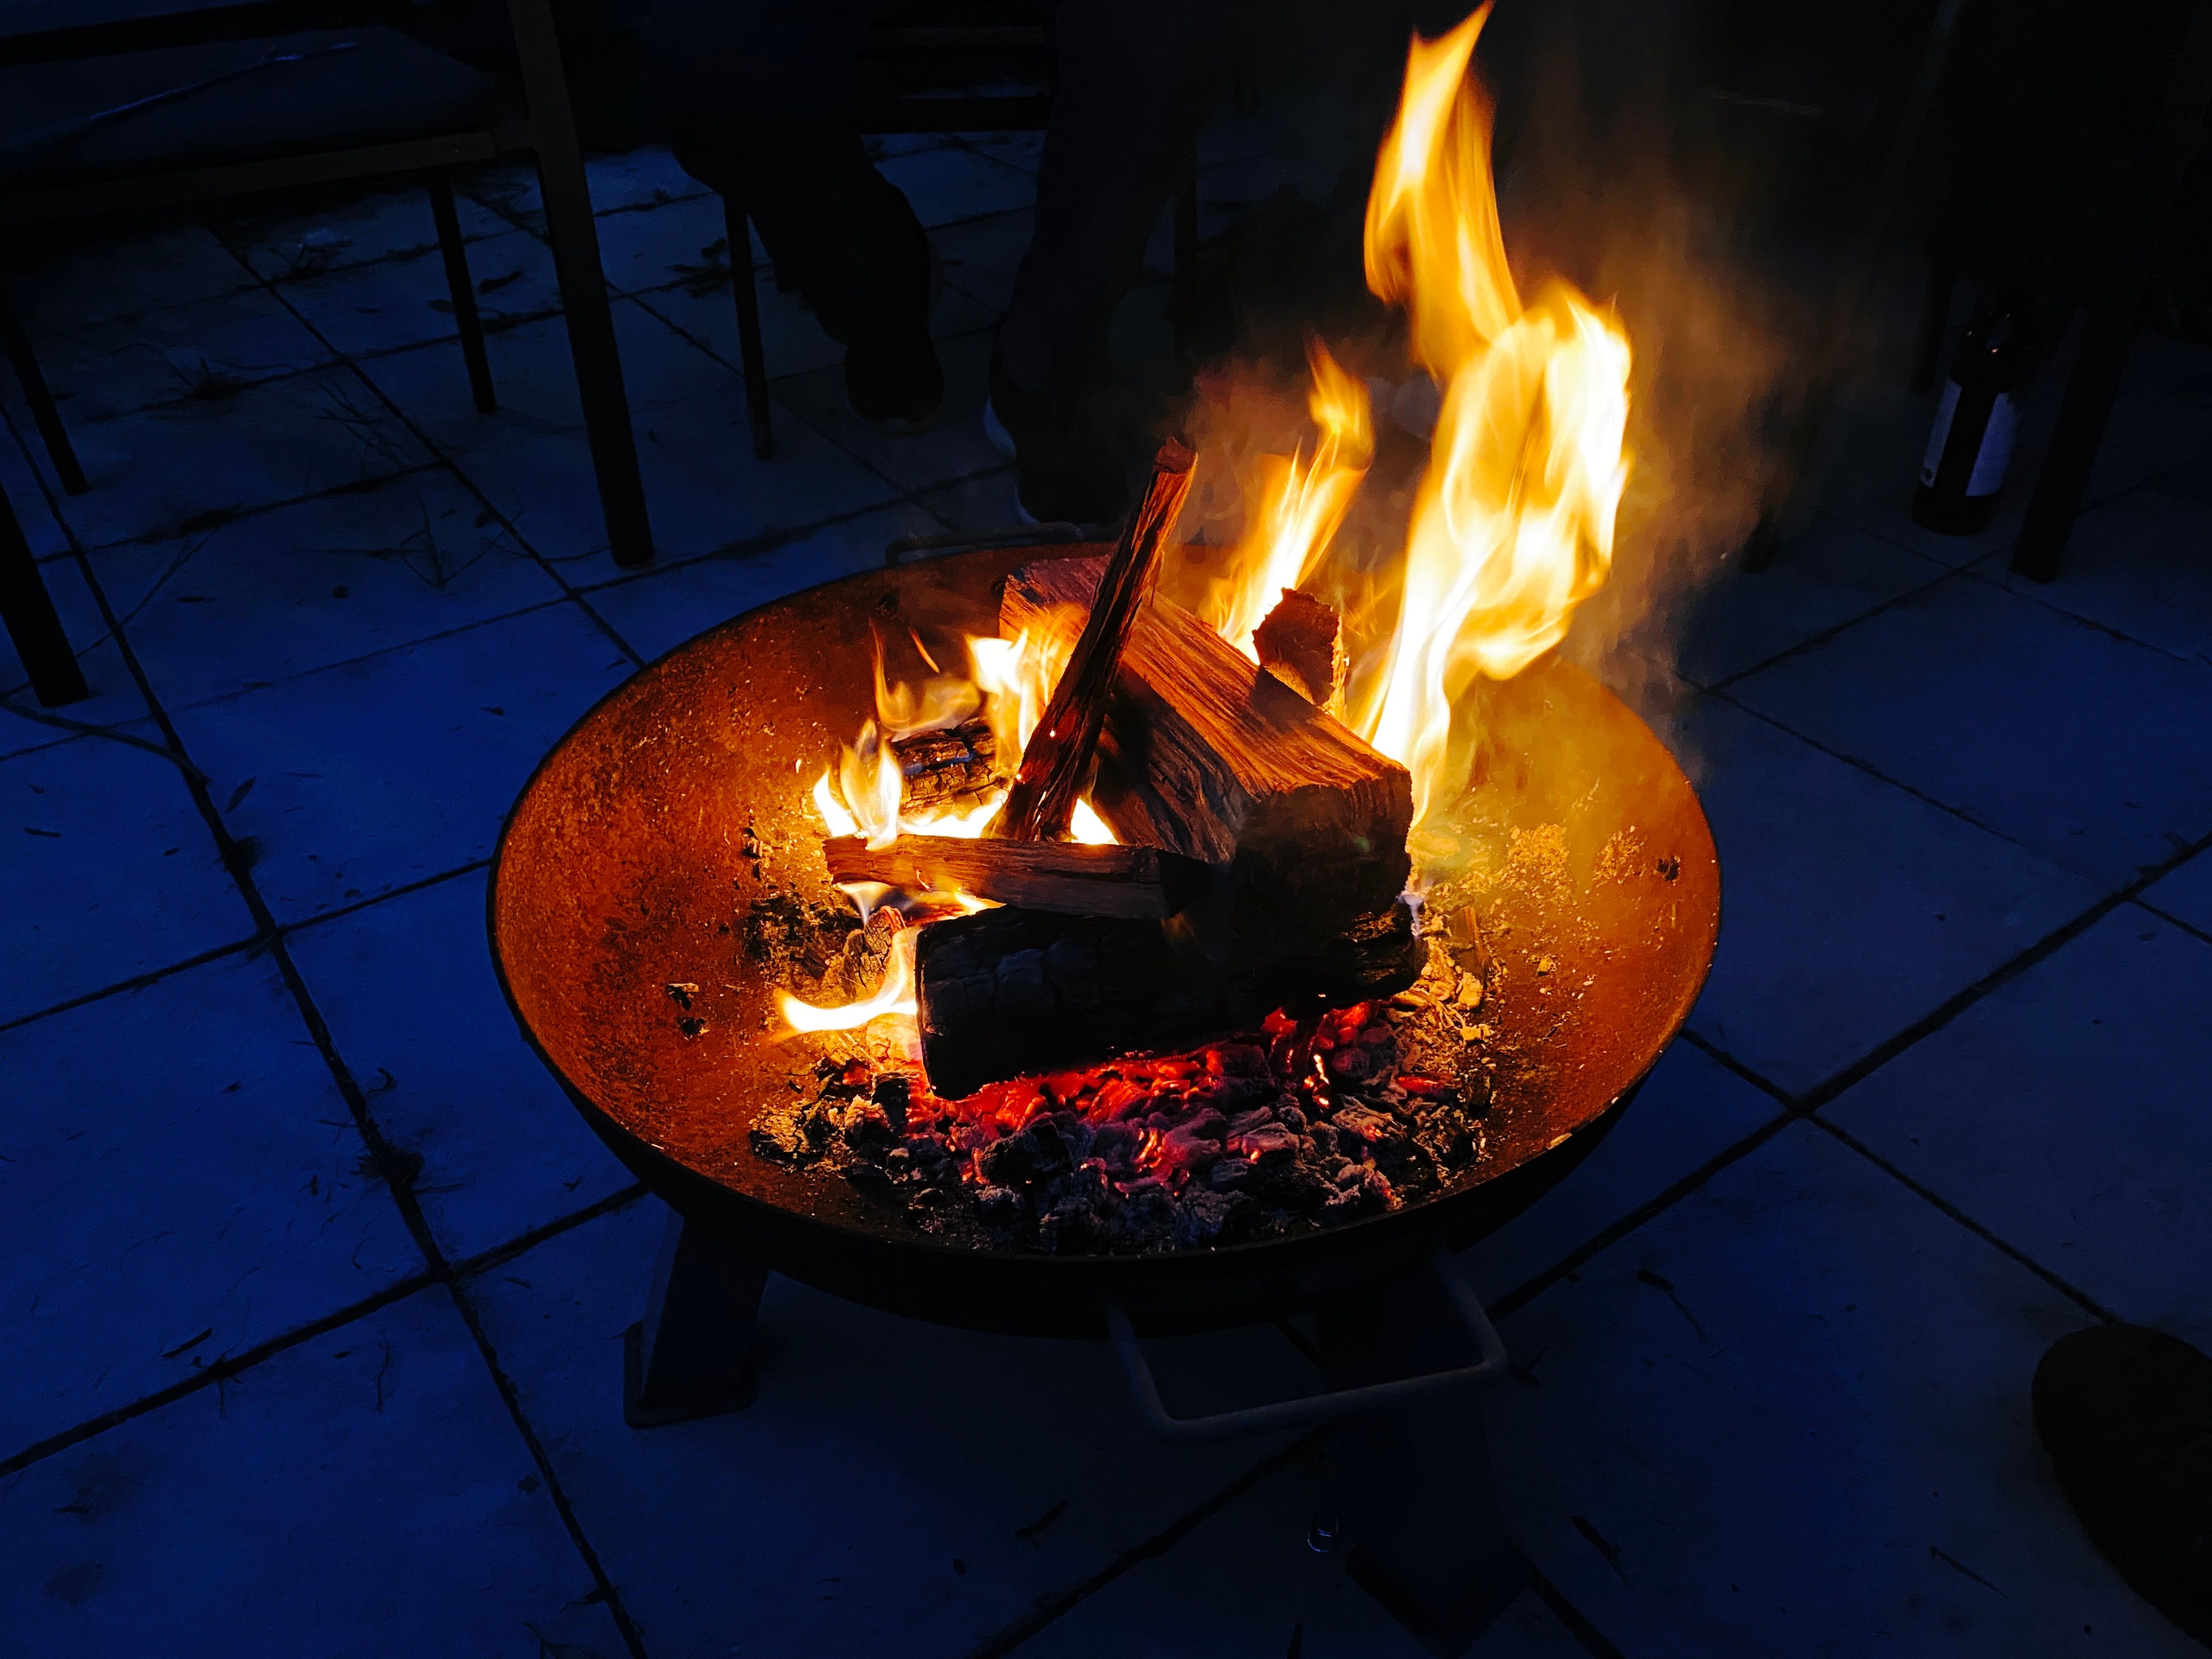 A photo of a raised metal fire "pit" with wood in it and flames merrily burning.